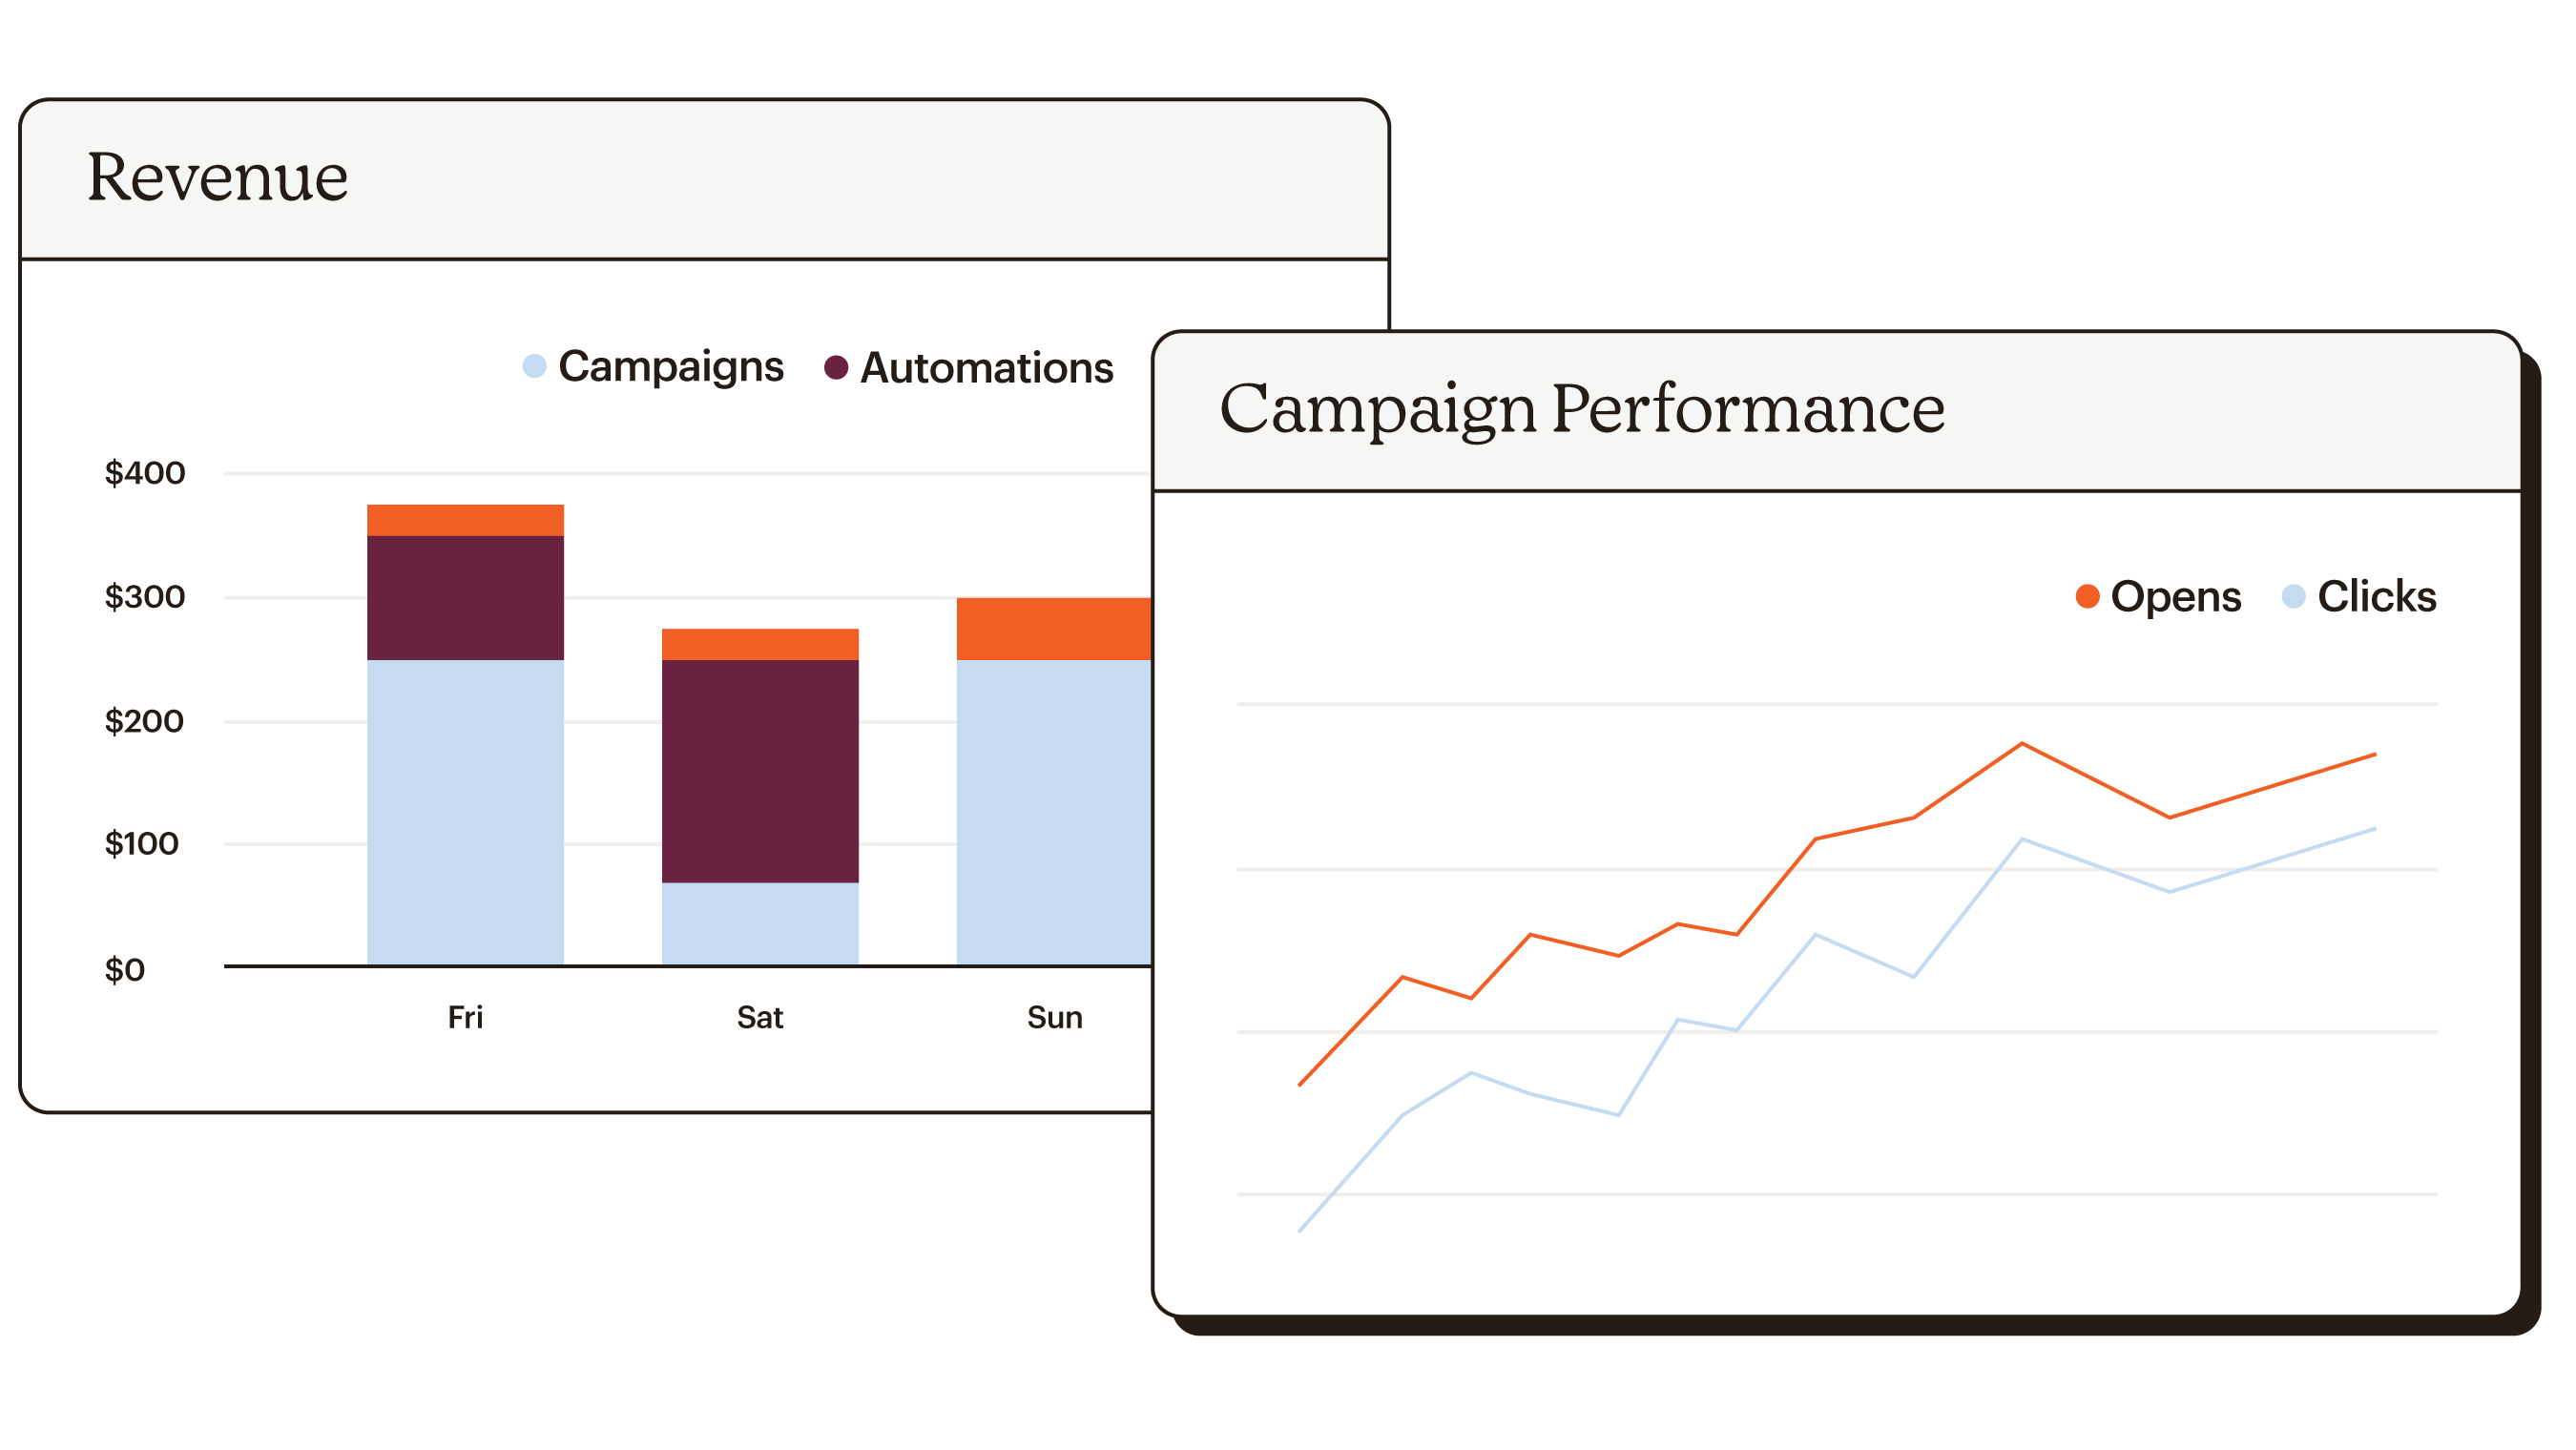 Revenue chart and campaign performance graph.